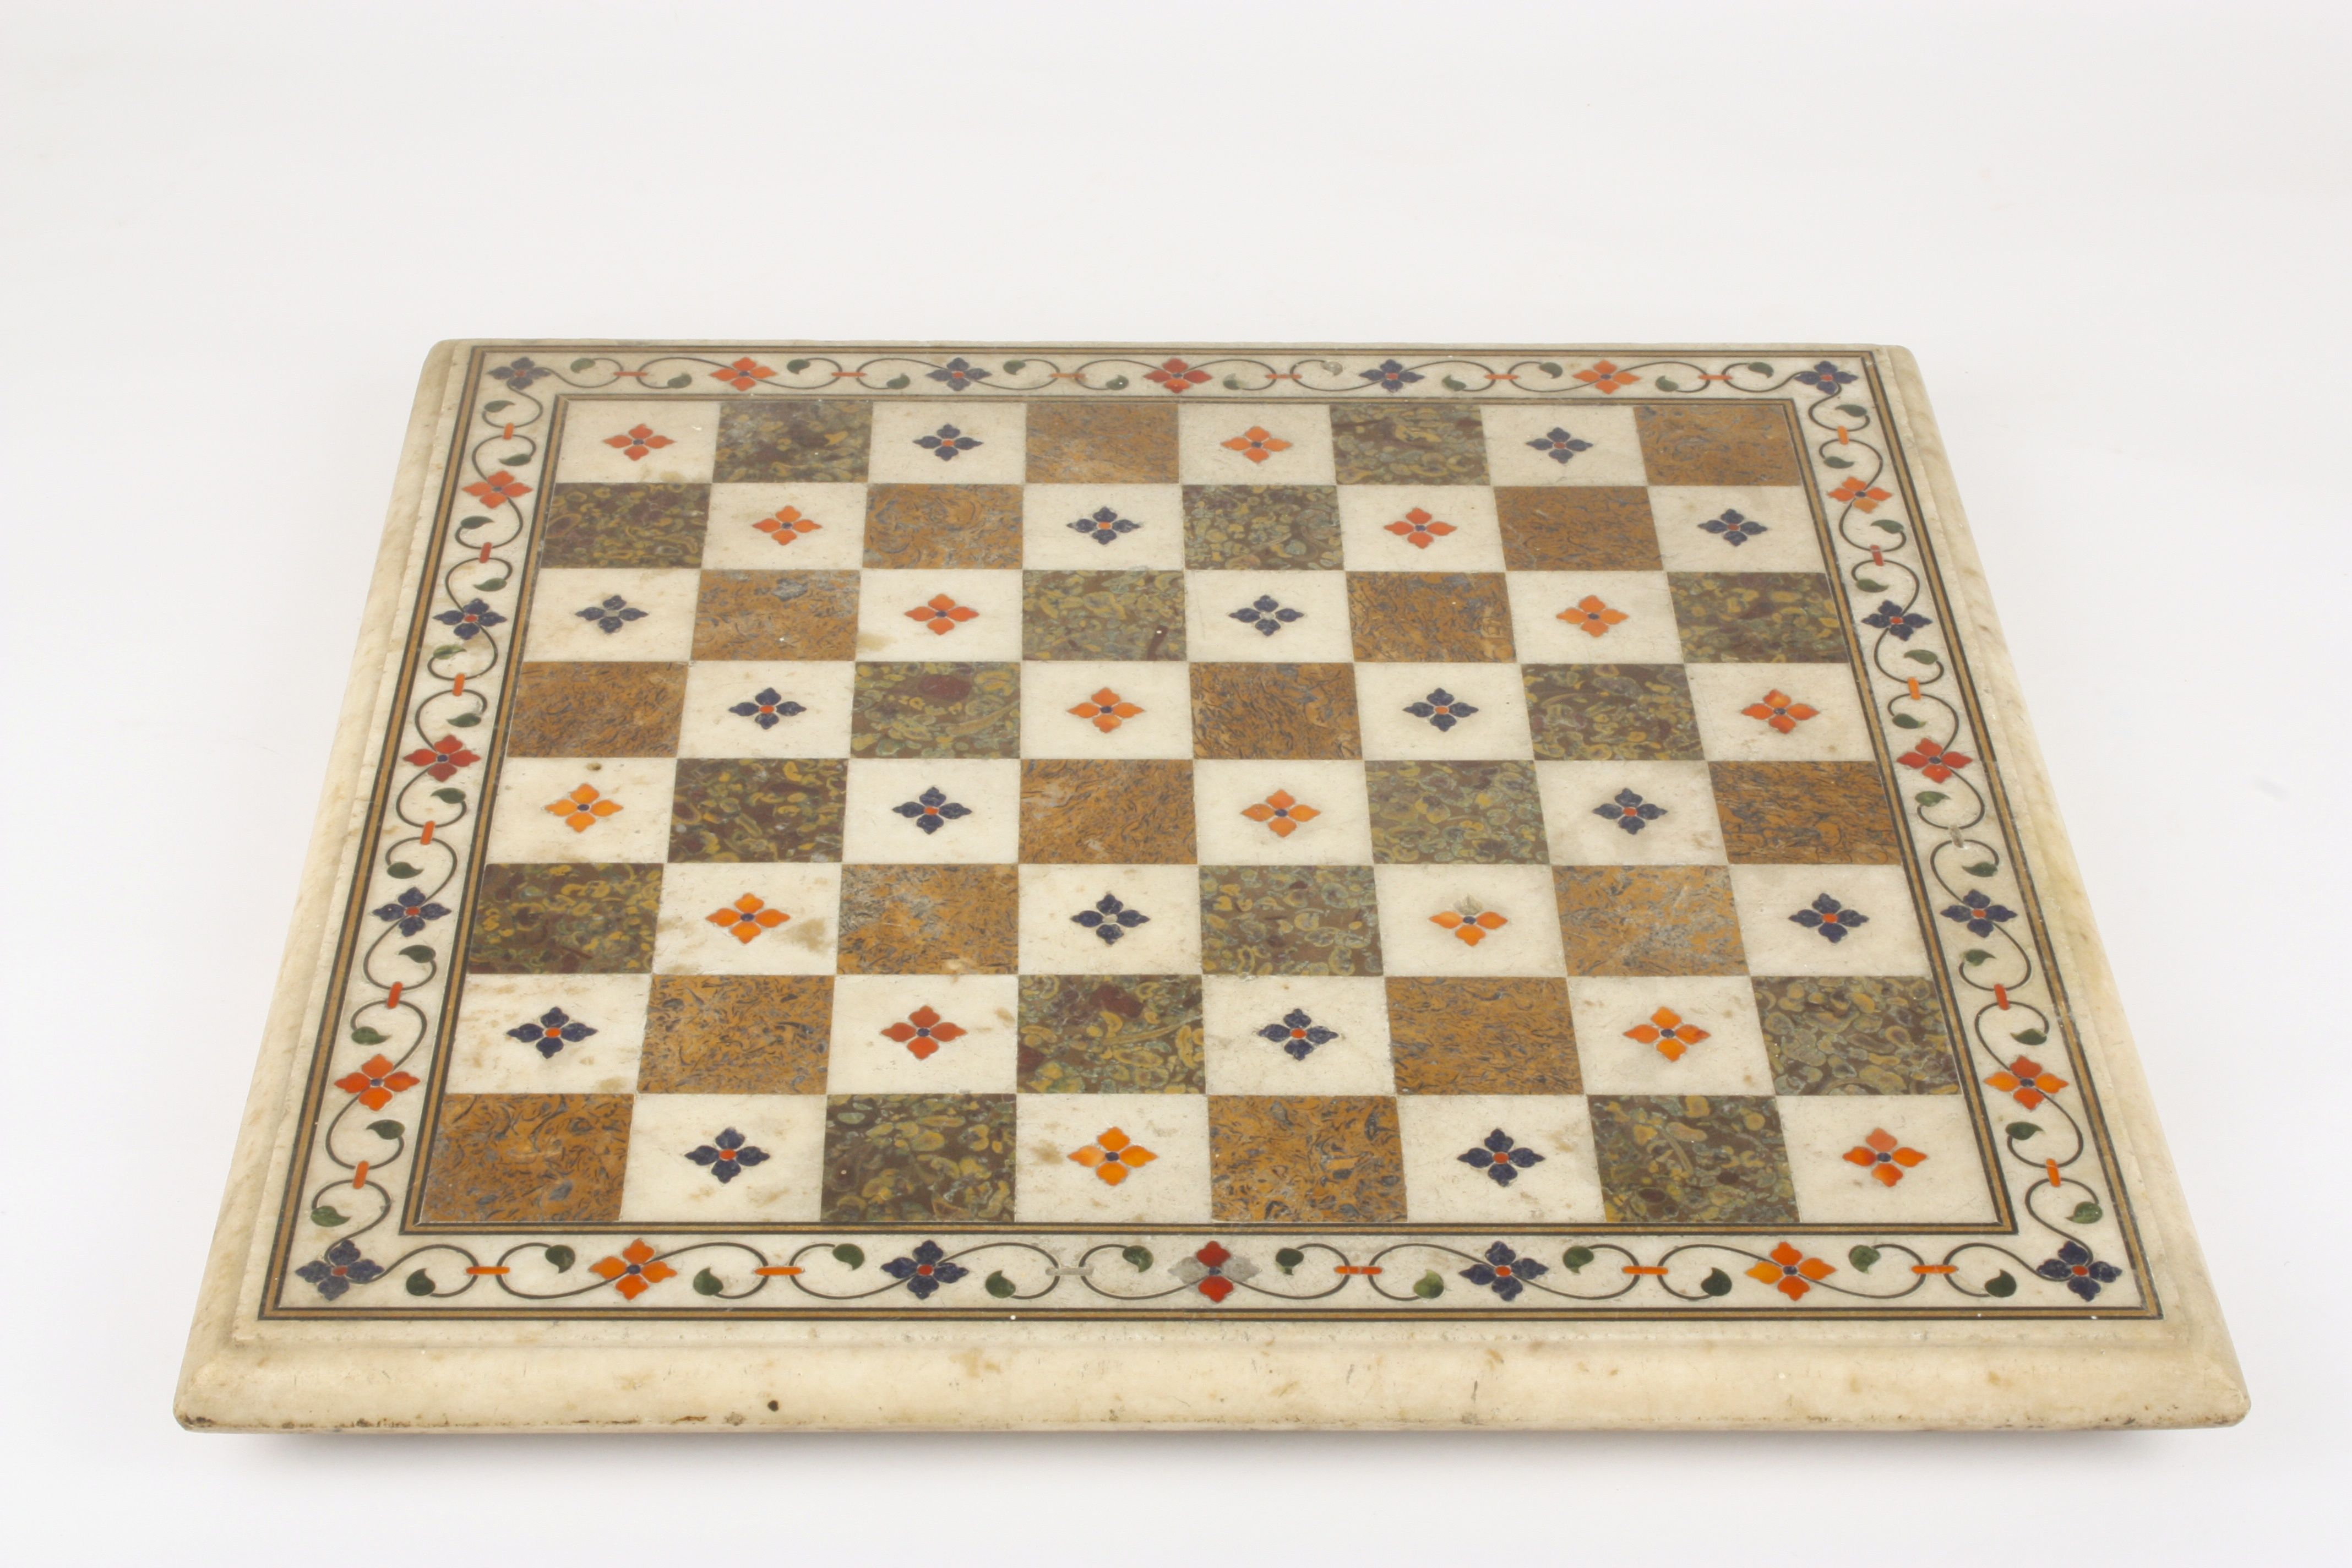 A 19th century Italian pietra dura chess board of square form inlaid with decorative floral motifs - Image 2 of 3